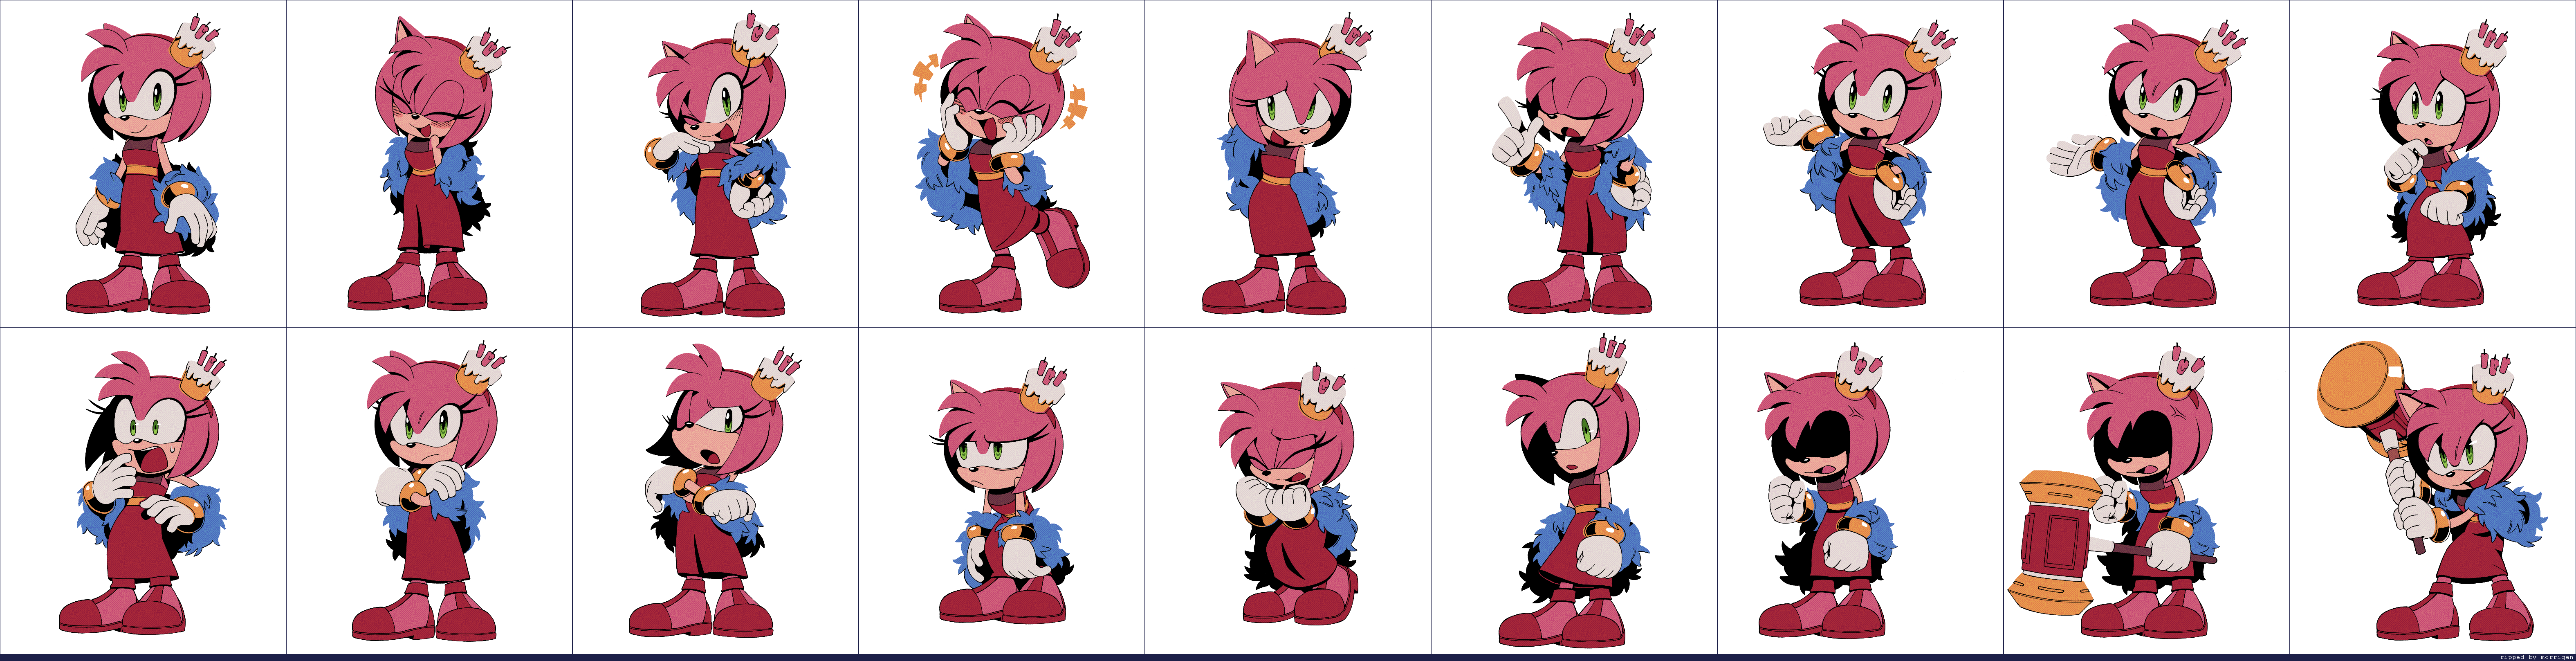 Amy_rose_fanlol on X: Amy's sprites from the murder of Sonic the